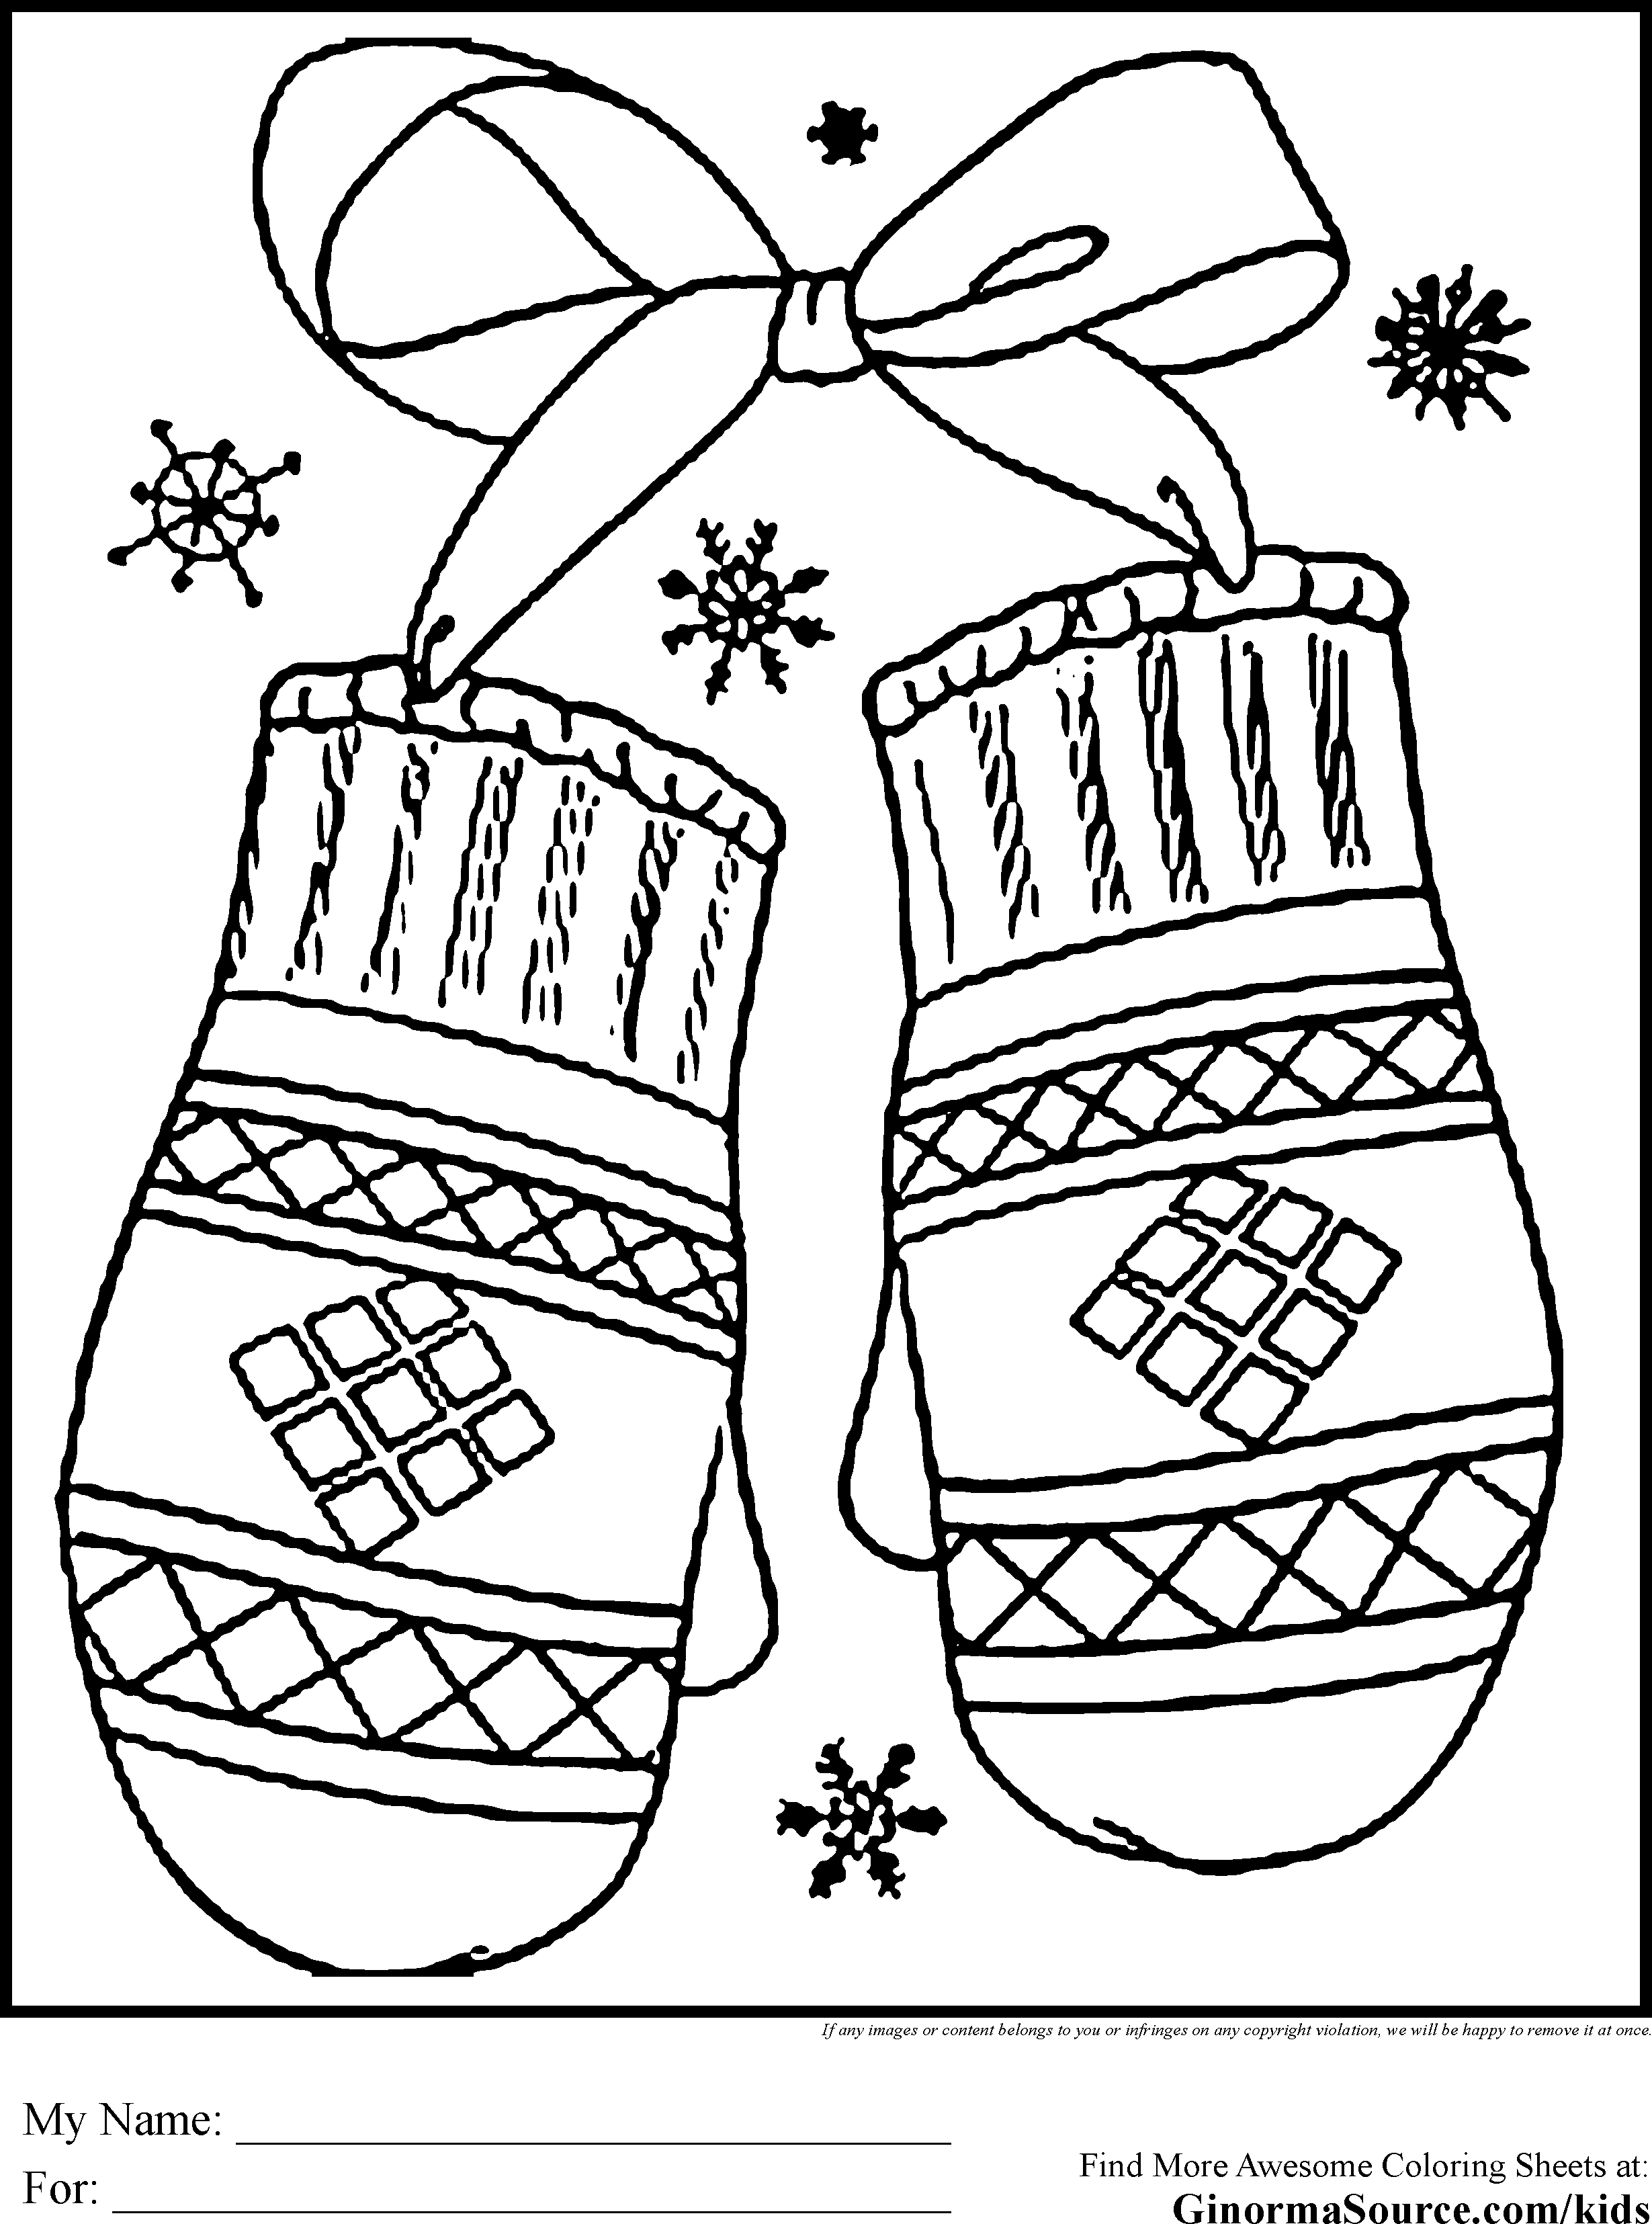 Winter Season Coloring Pages | Crafts and Worksheets for ...